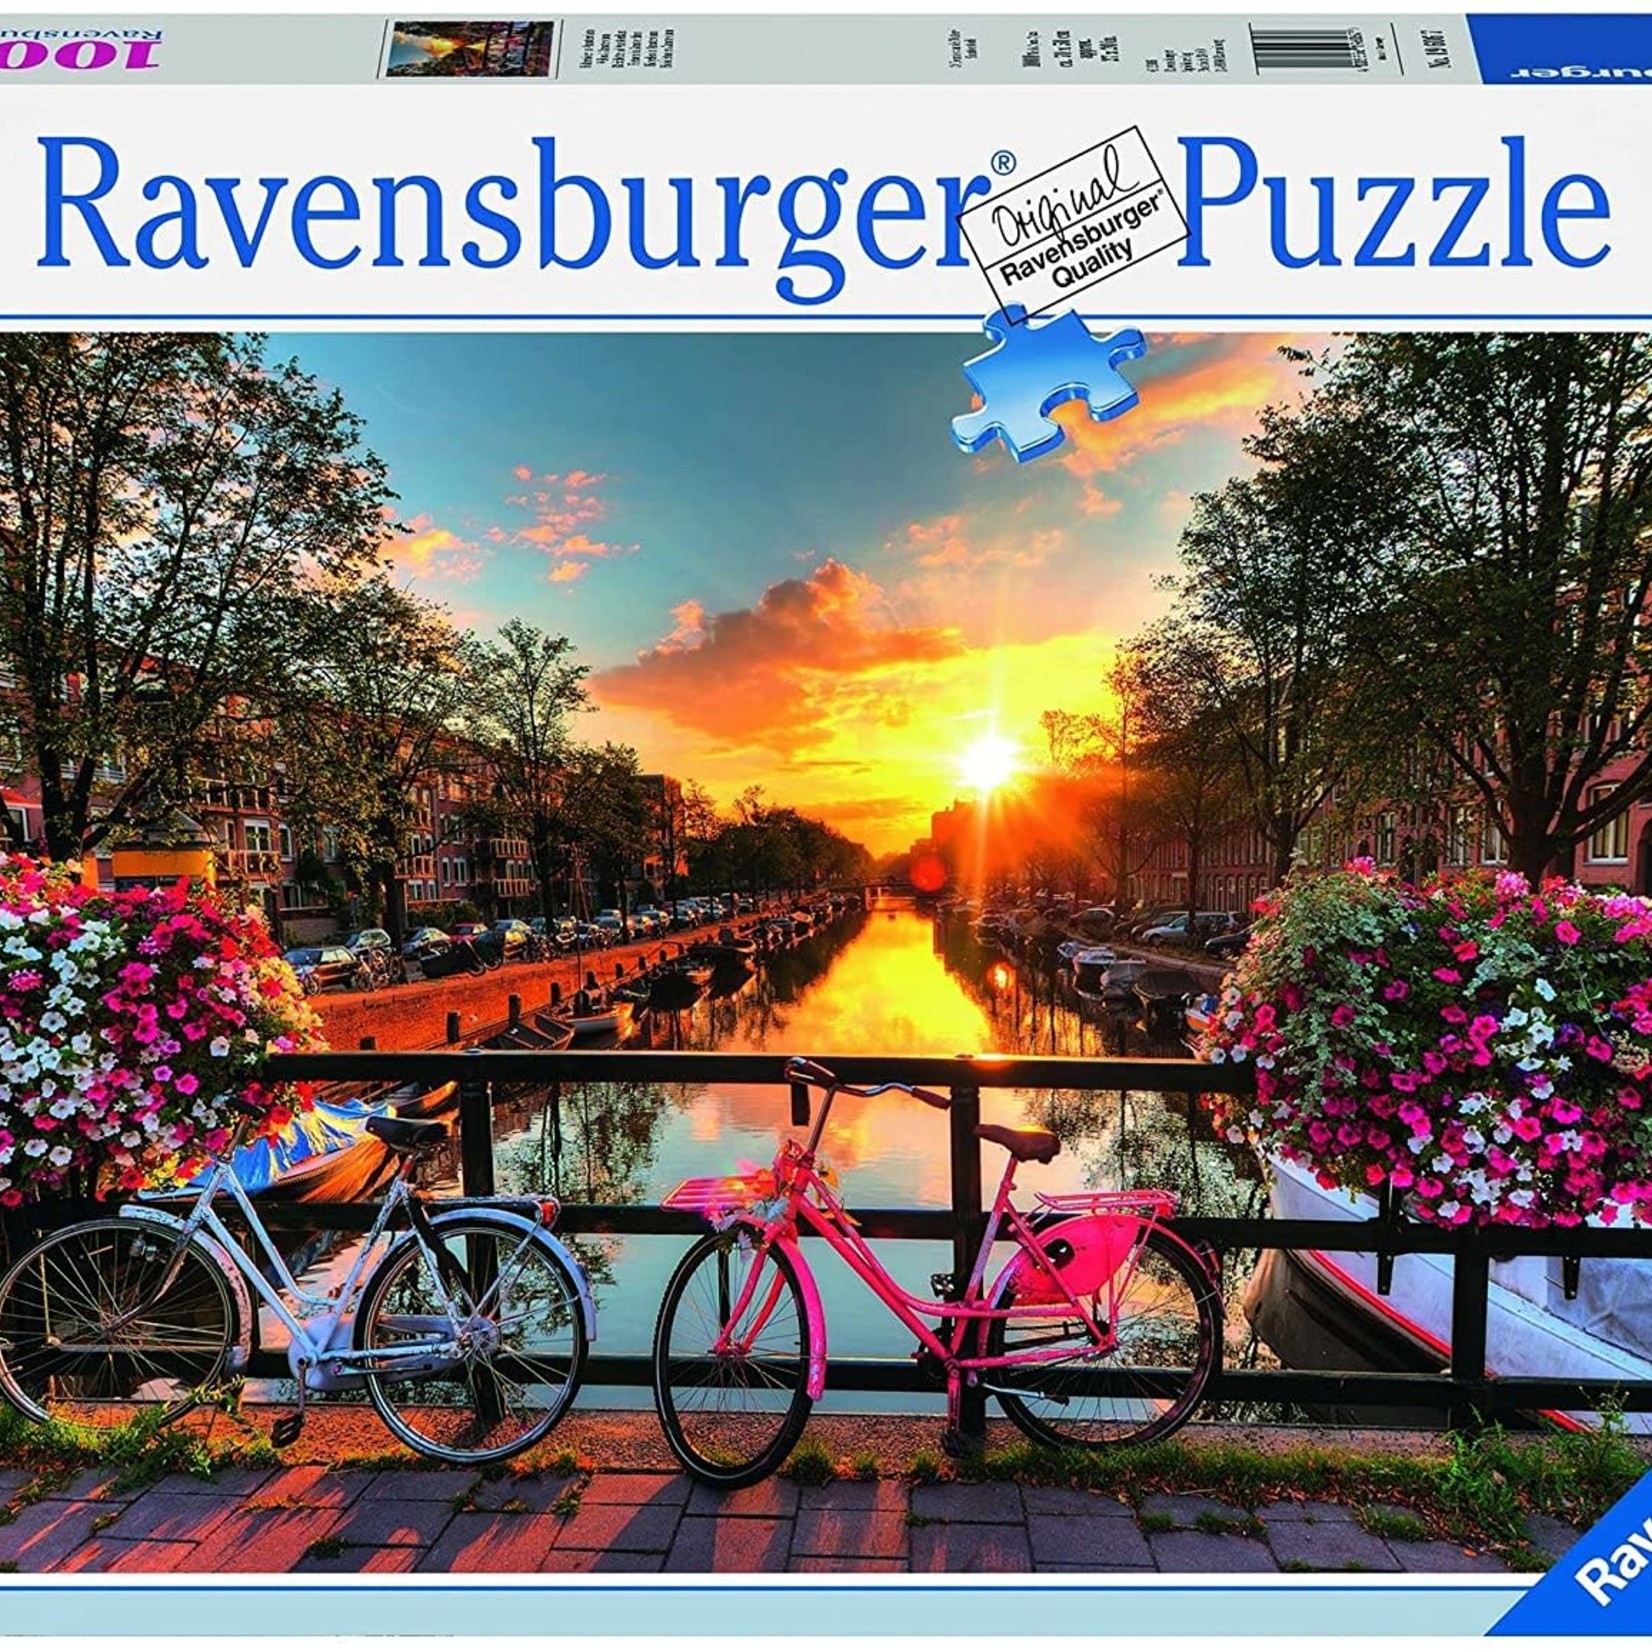 Ravensburger Bicycles in Amsterdam - 1000 pc